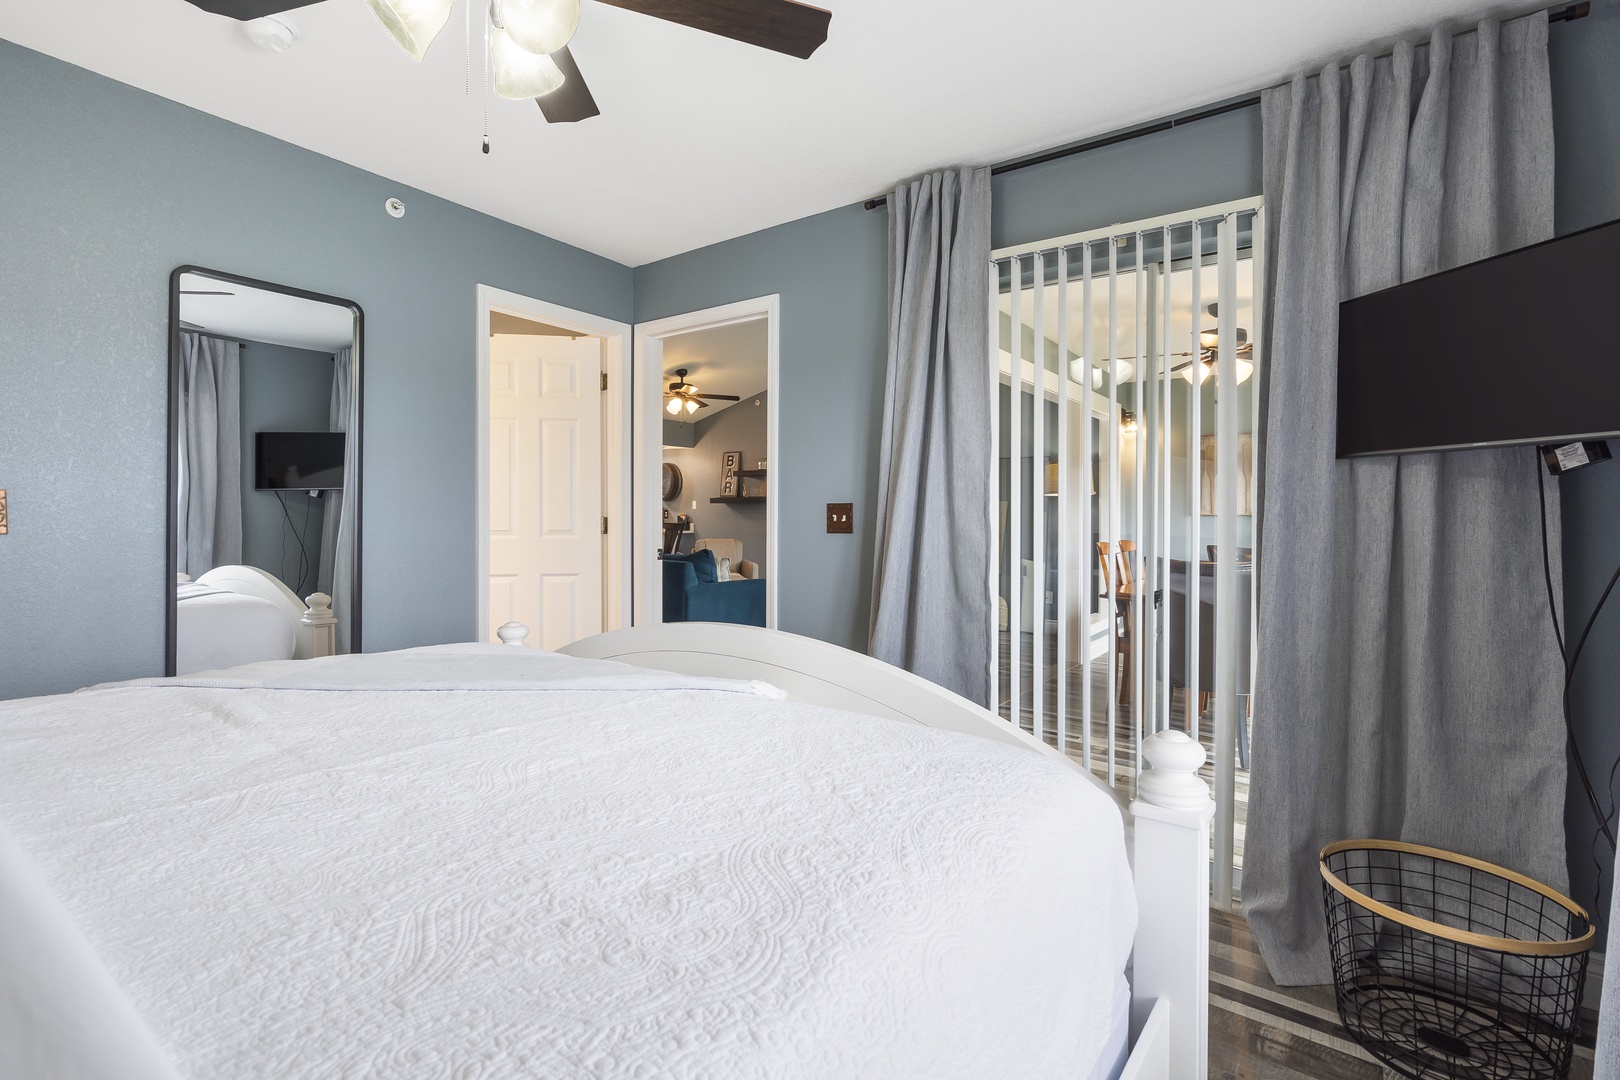 The king suite showcases a private ensuite, TV, & sunroom access